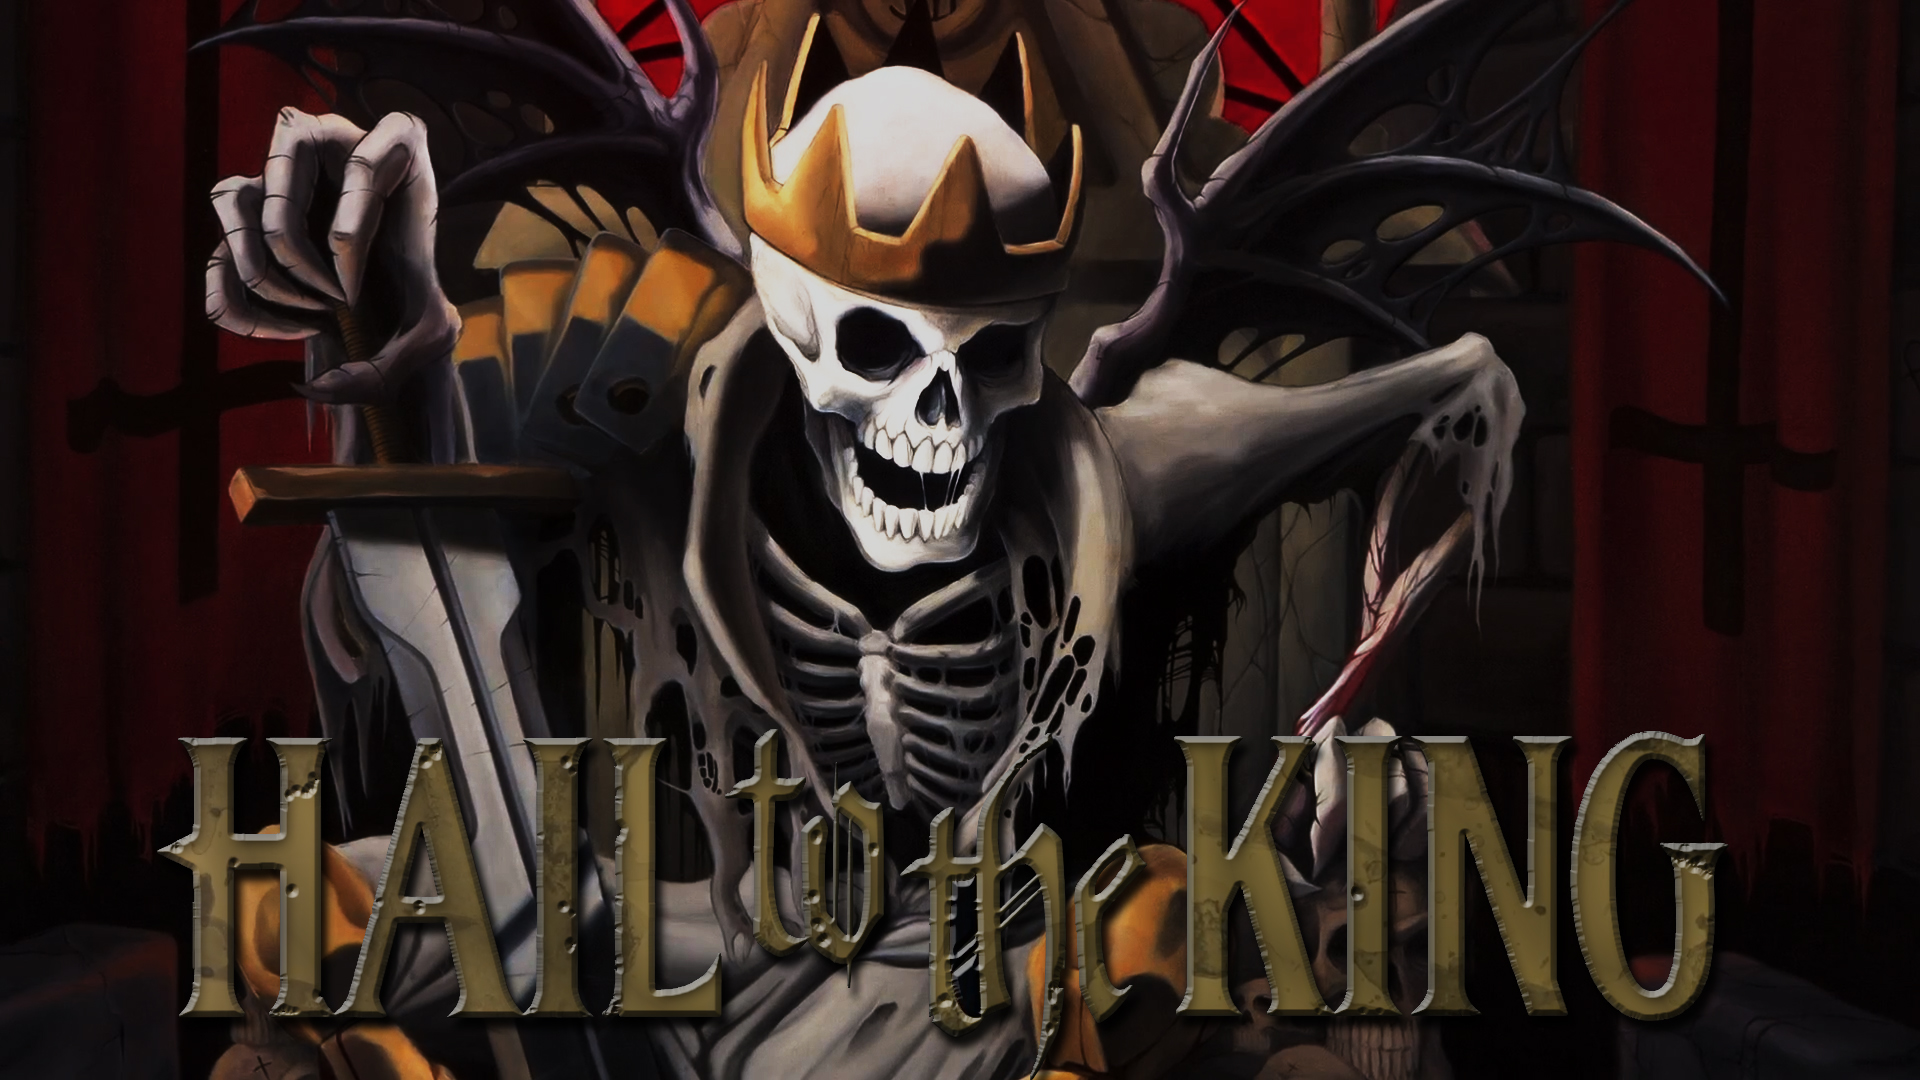 Hail to the King Deathbat A7X Wallpaper HD Wallpaper with 1920x1080